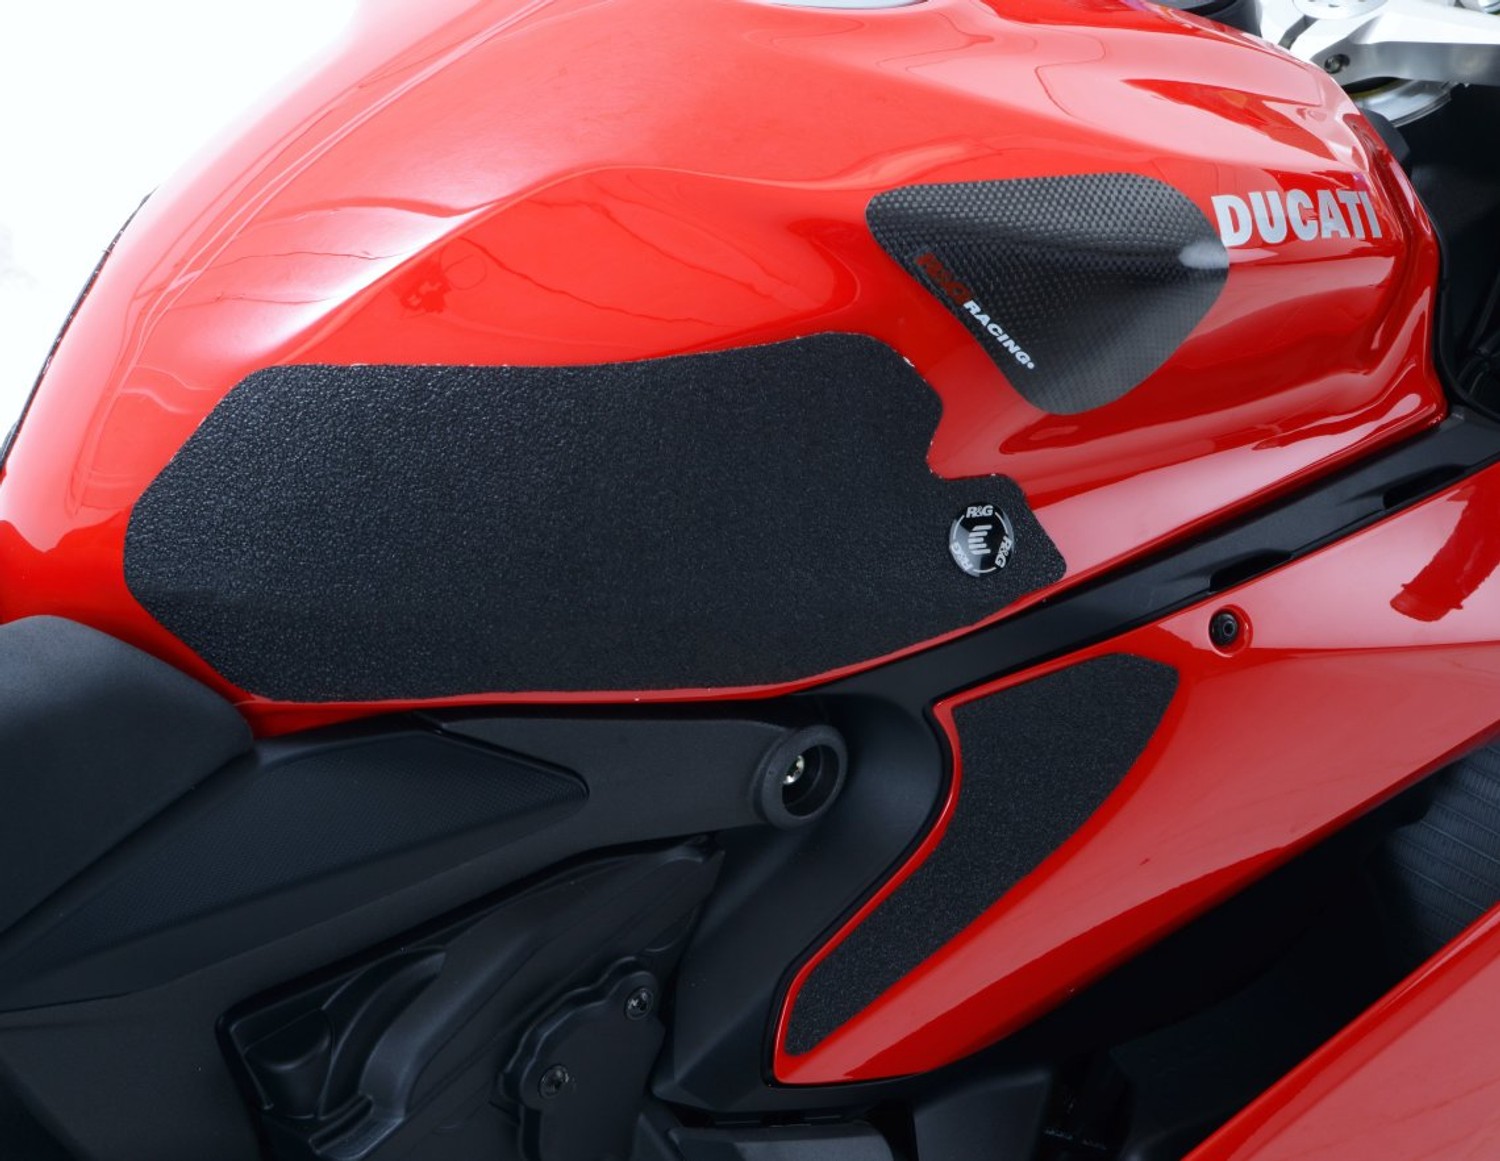 4 Pieces '18 R&G Tank Traction Grips For Ducati Panigale V4